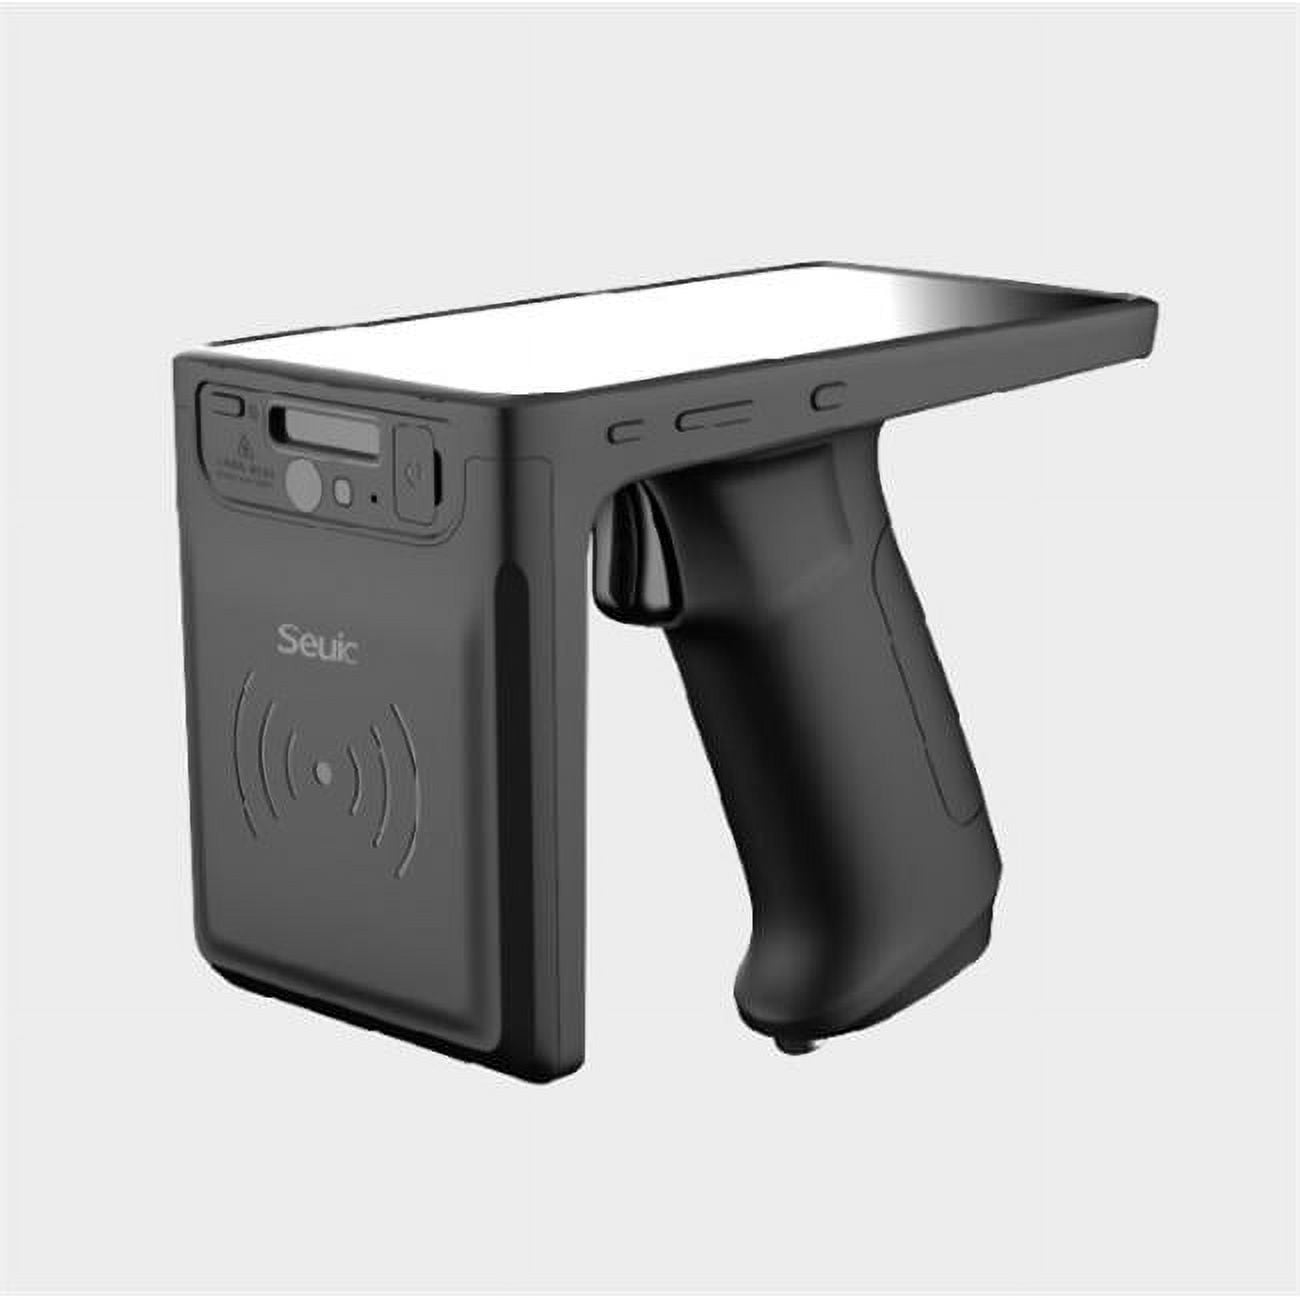 Seuic 8061003010 AUTOID UTouch Cortex-A53 4 GB & 64 GB Android 9.0 RFID Reader